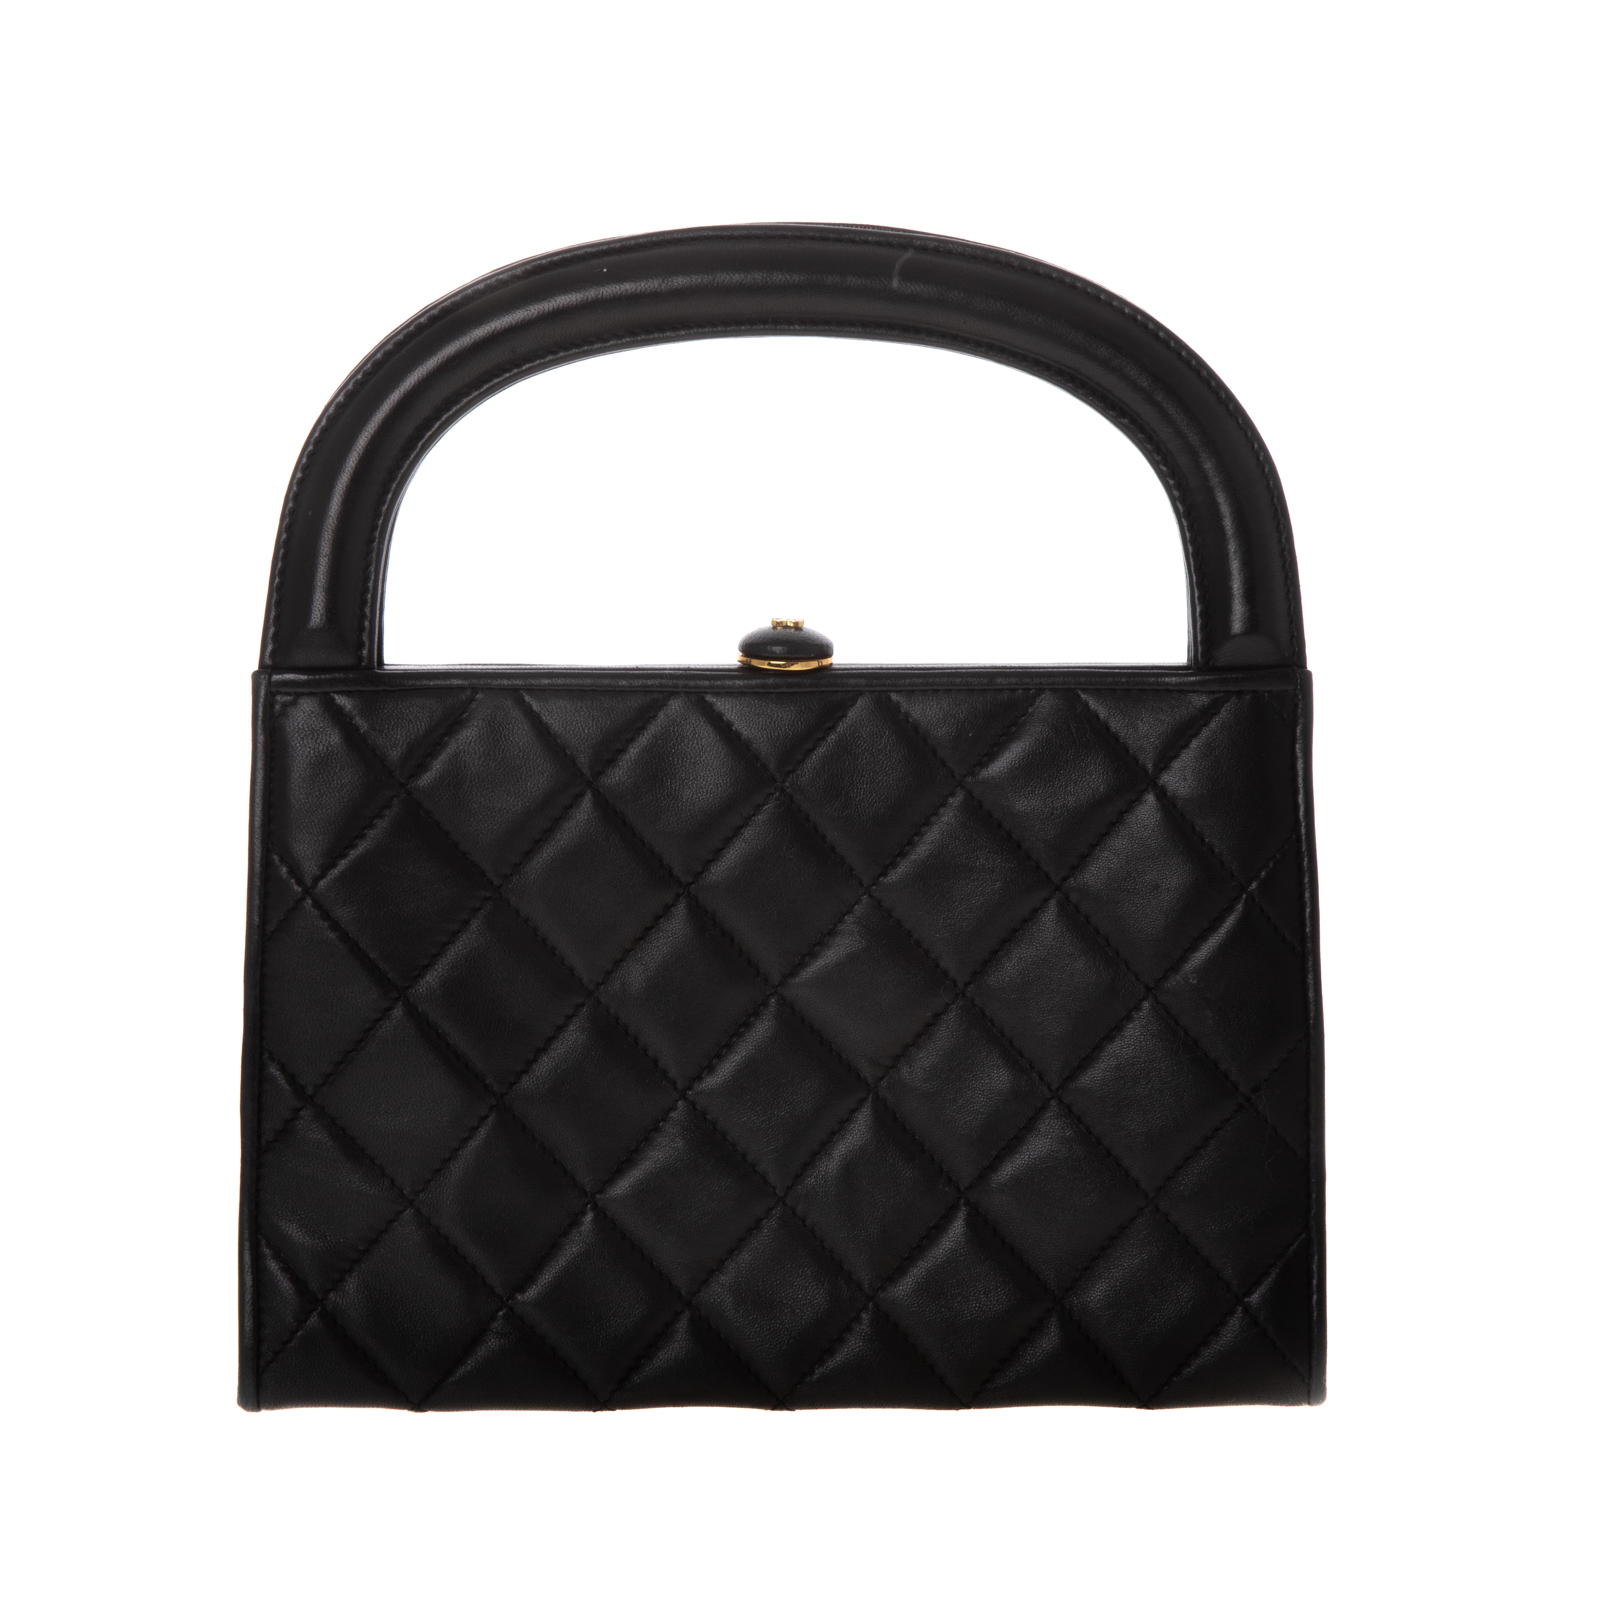 A CHANEL QUILTED TOP HANDLE A black 287d15